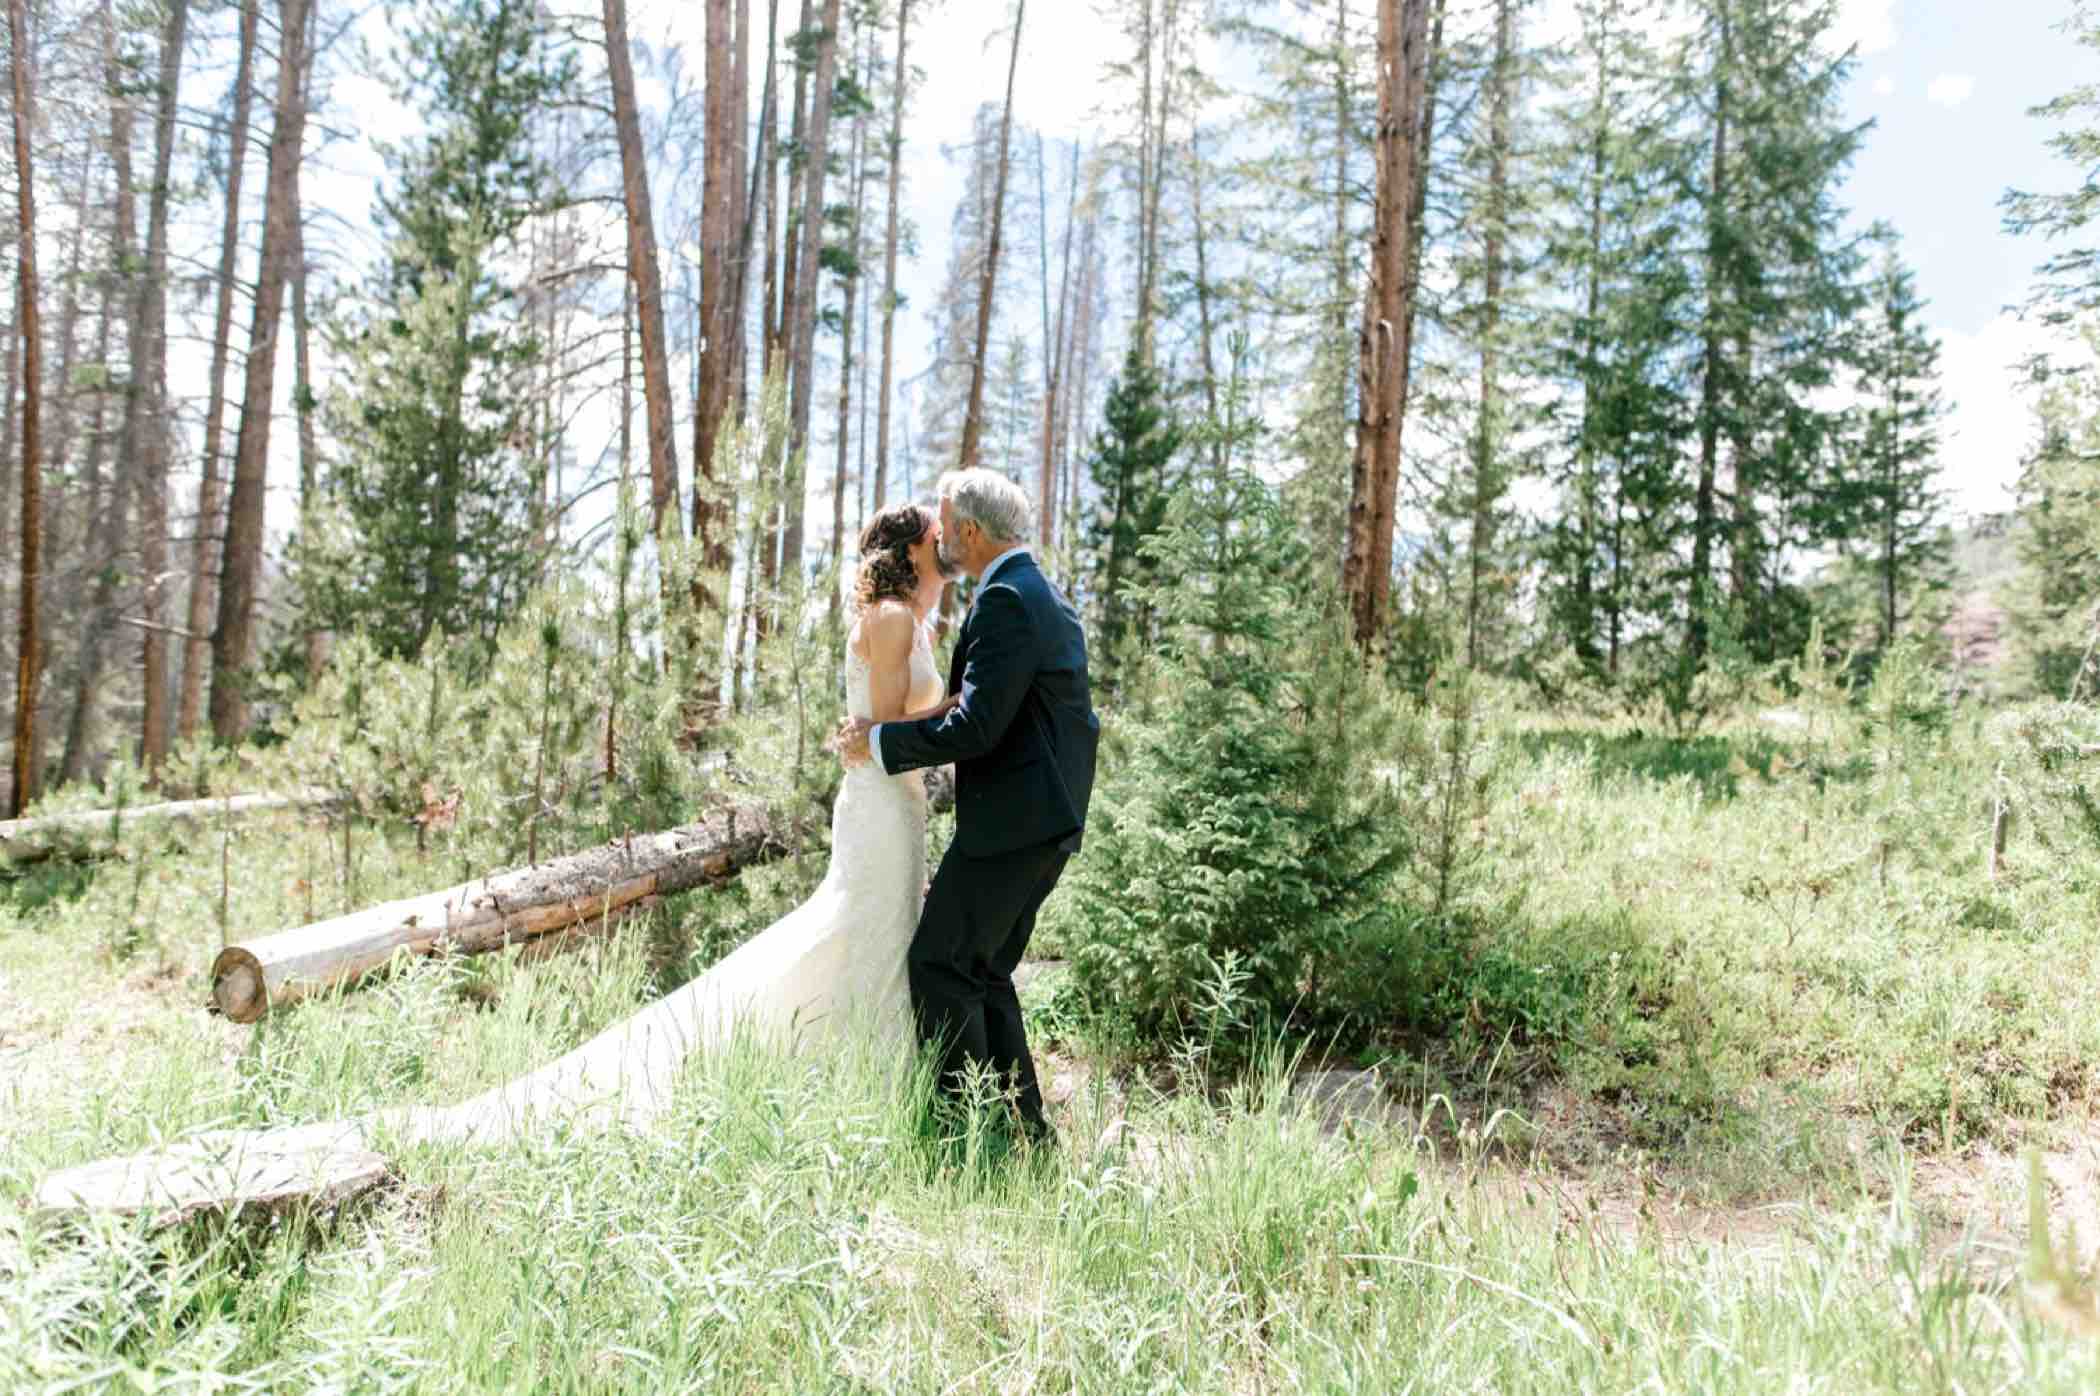 Sallie sees her father before her wedding at Piney River Ranch in Vail, Colorado. Photo by Ali and Garrett, Romantic, Adventurous, Nostalgic Wedding Photographers.